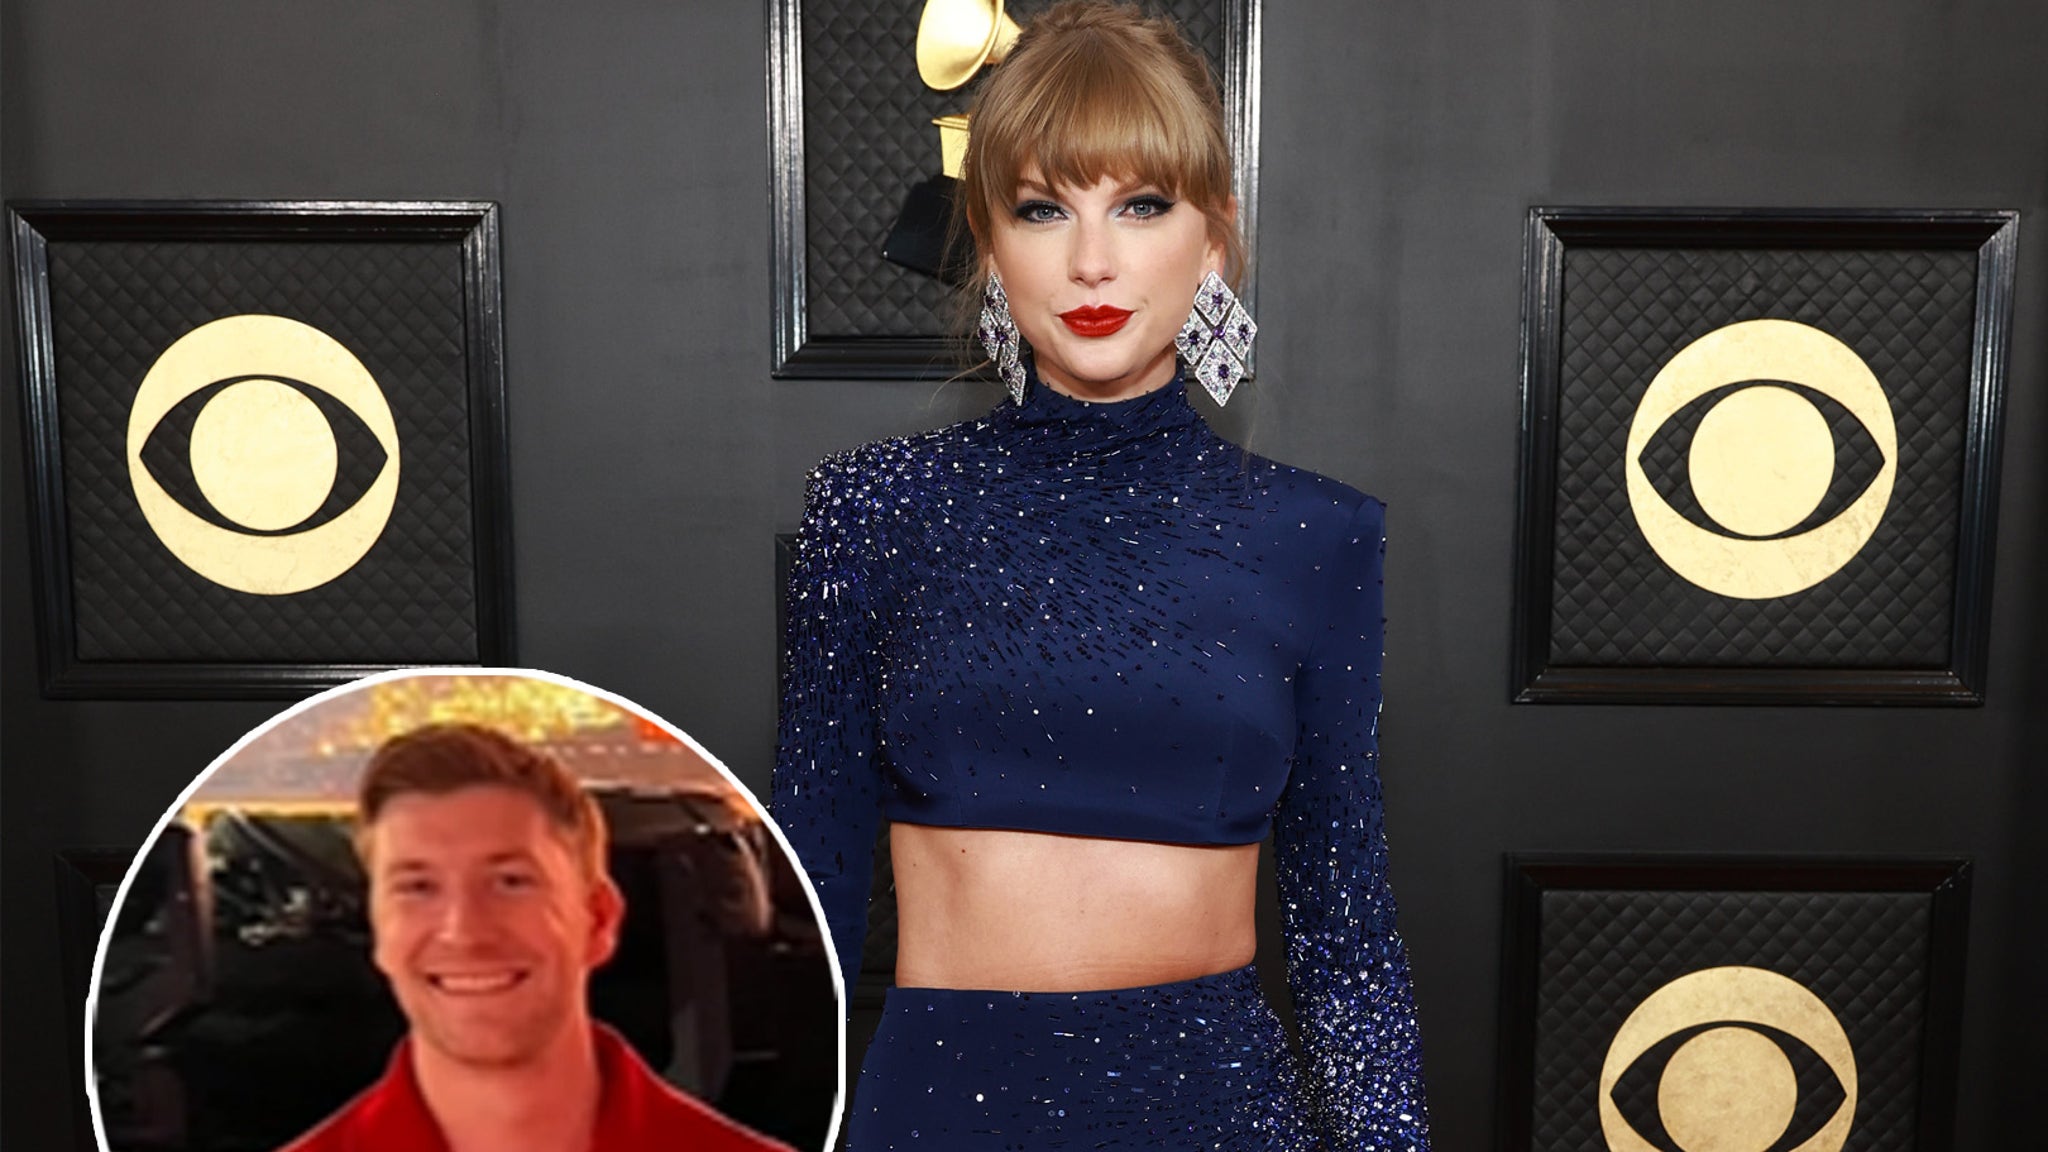 Taylor Swift Eras Tour Security Guard Claims He Was Fired After Asking Fans for a Photo